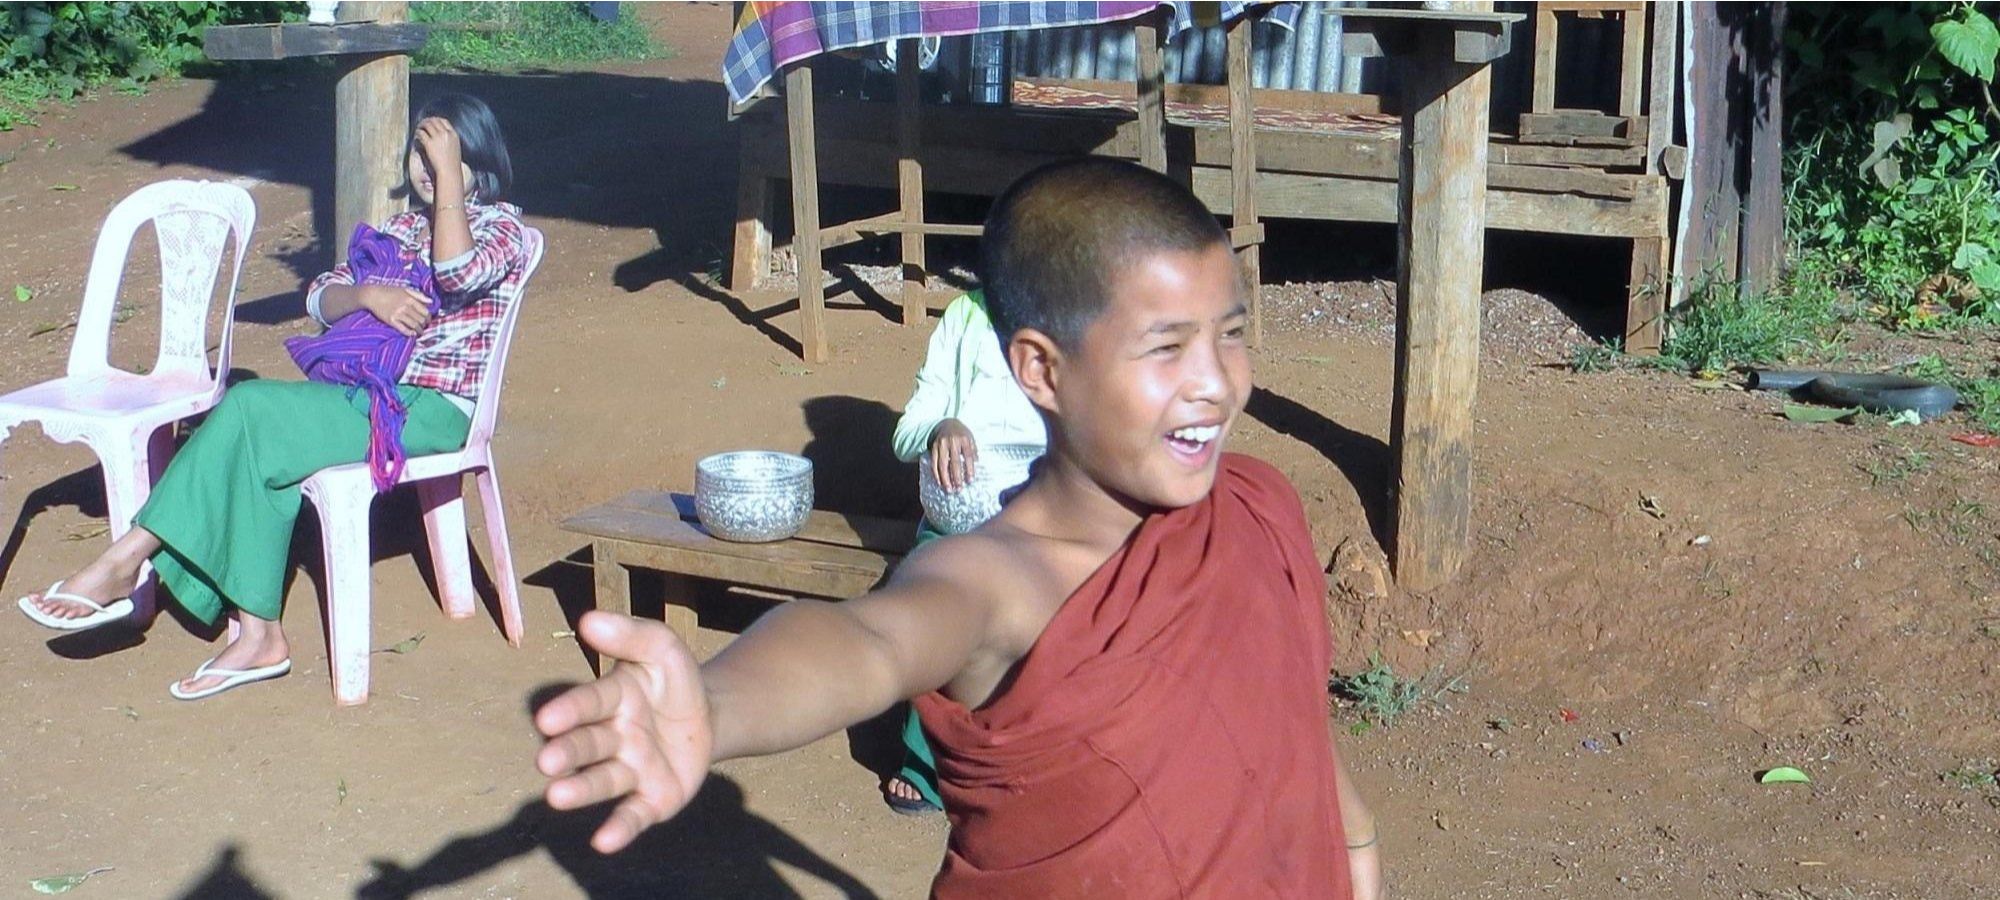 Young Monk giving cyclists the high 5 